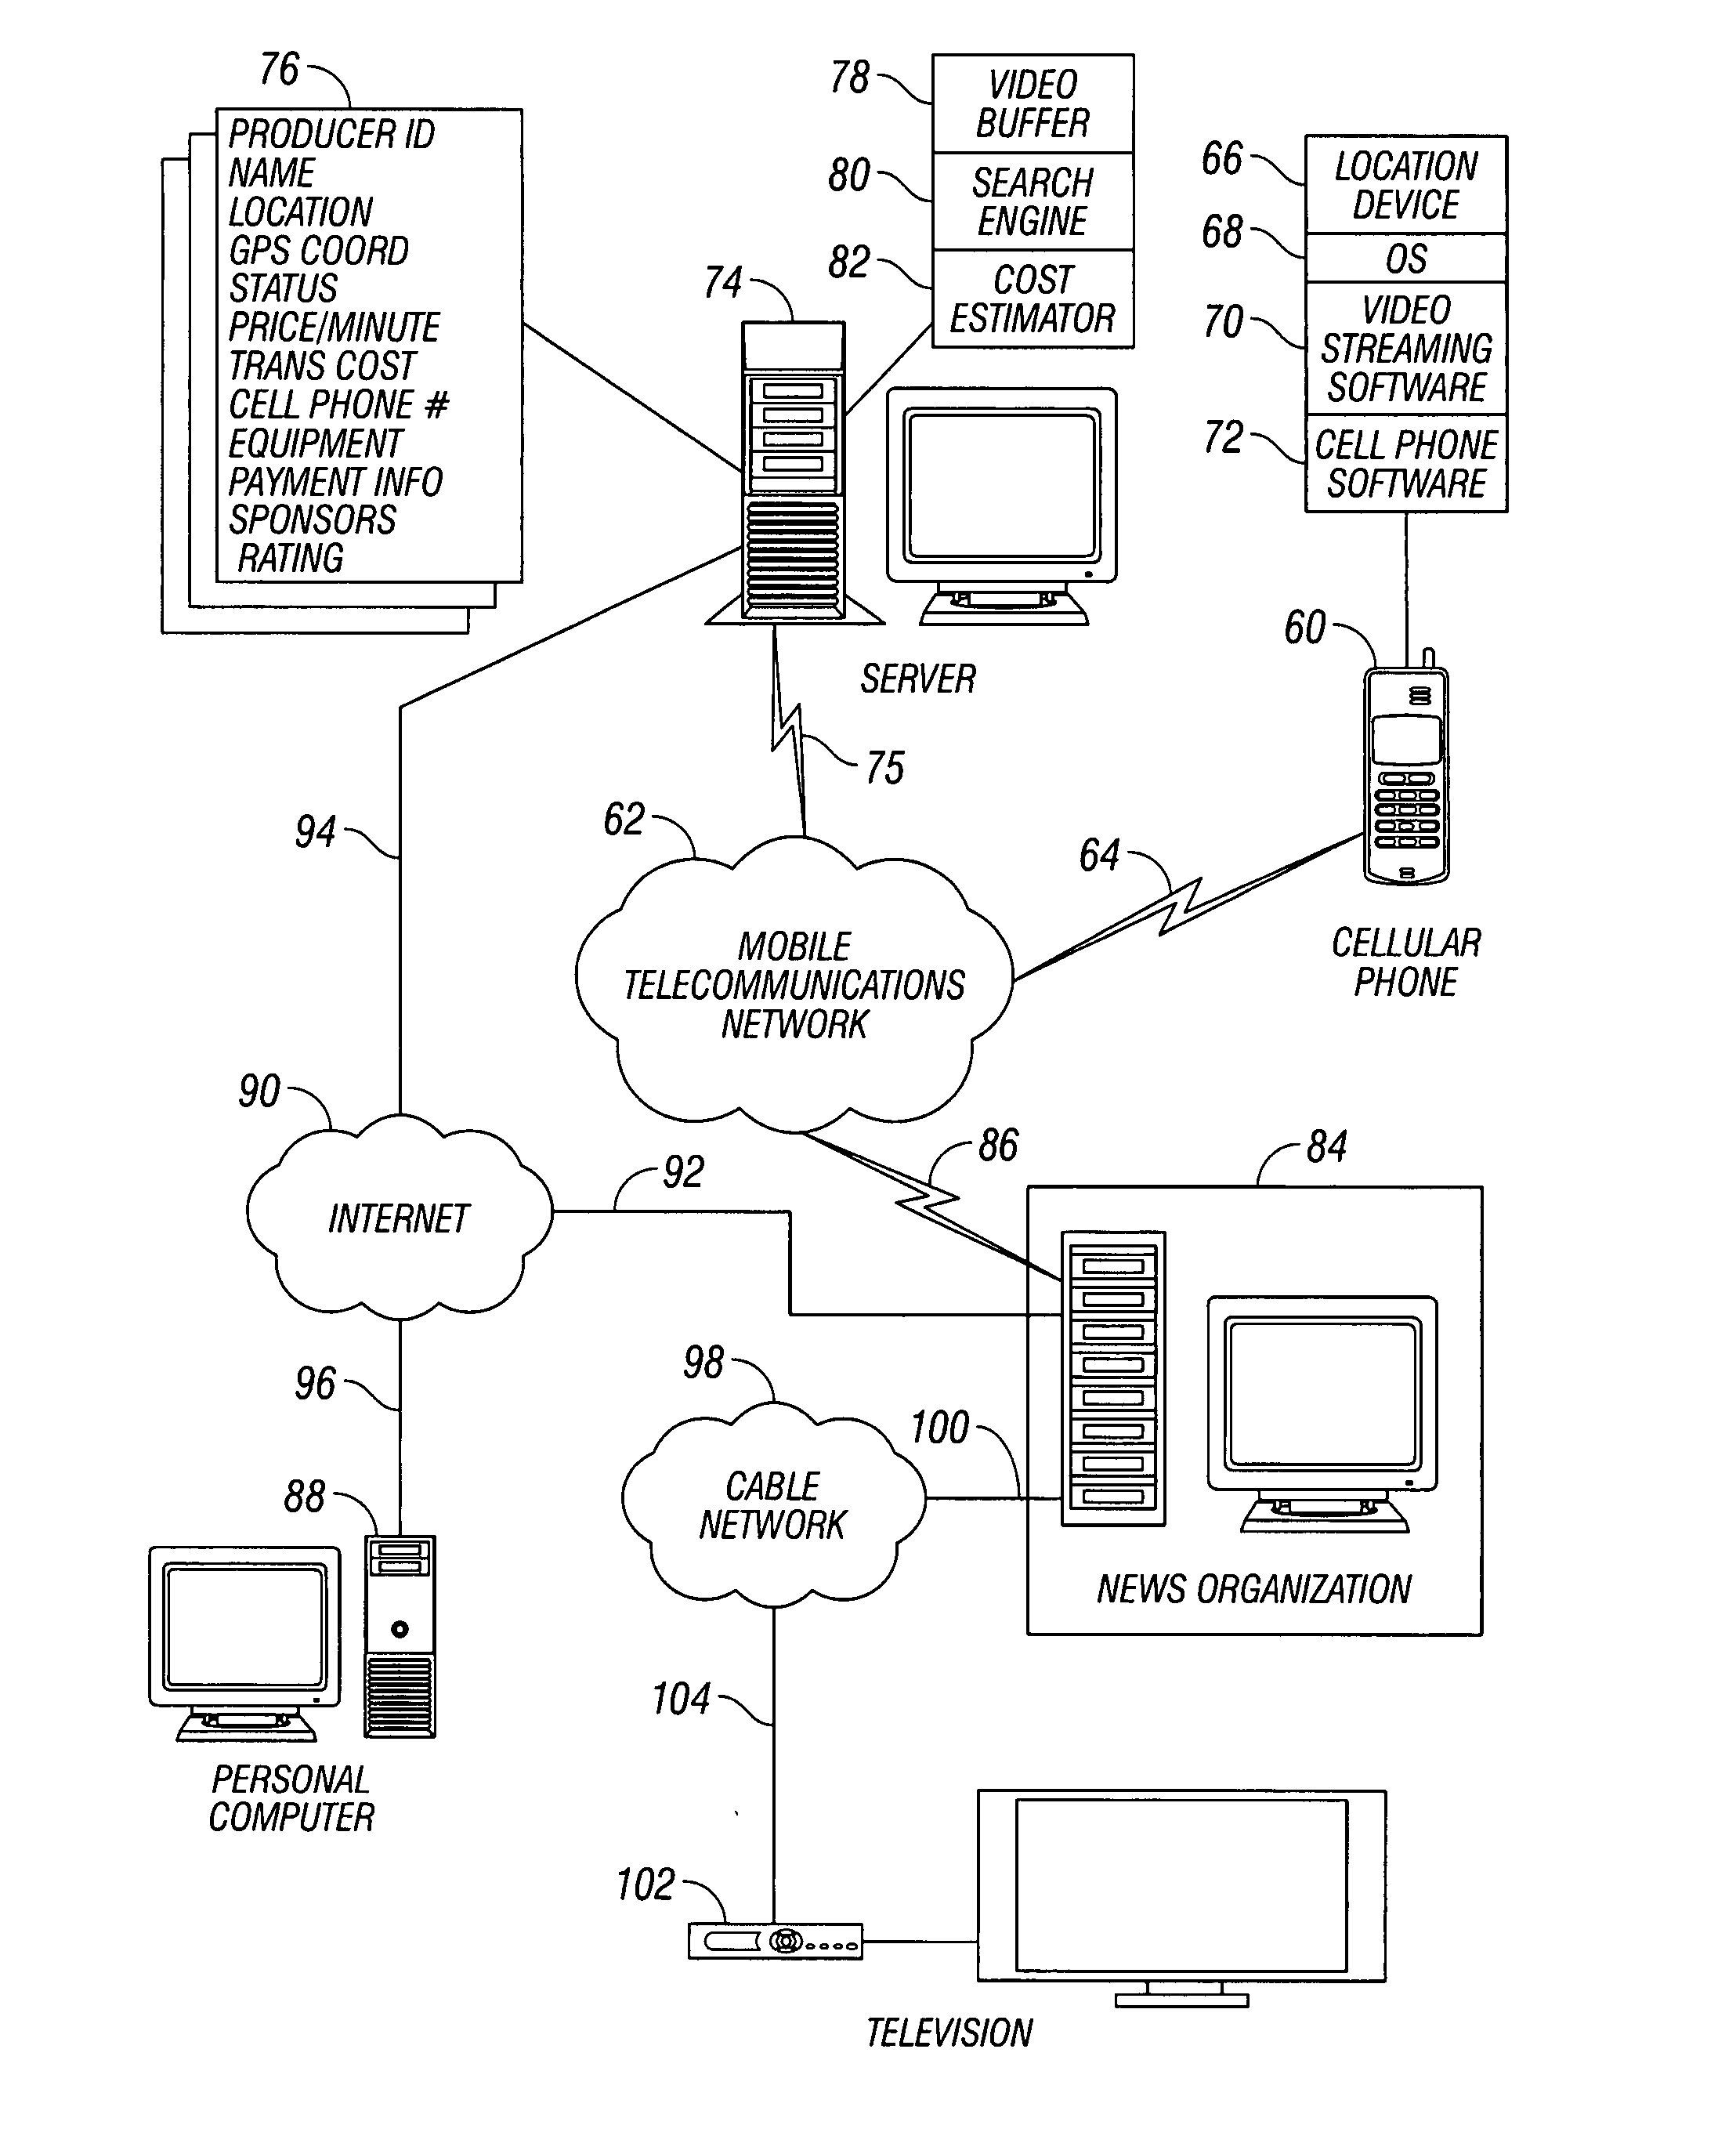 System and method for video on request